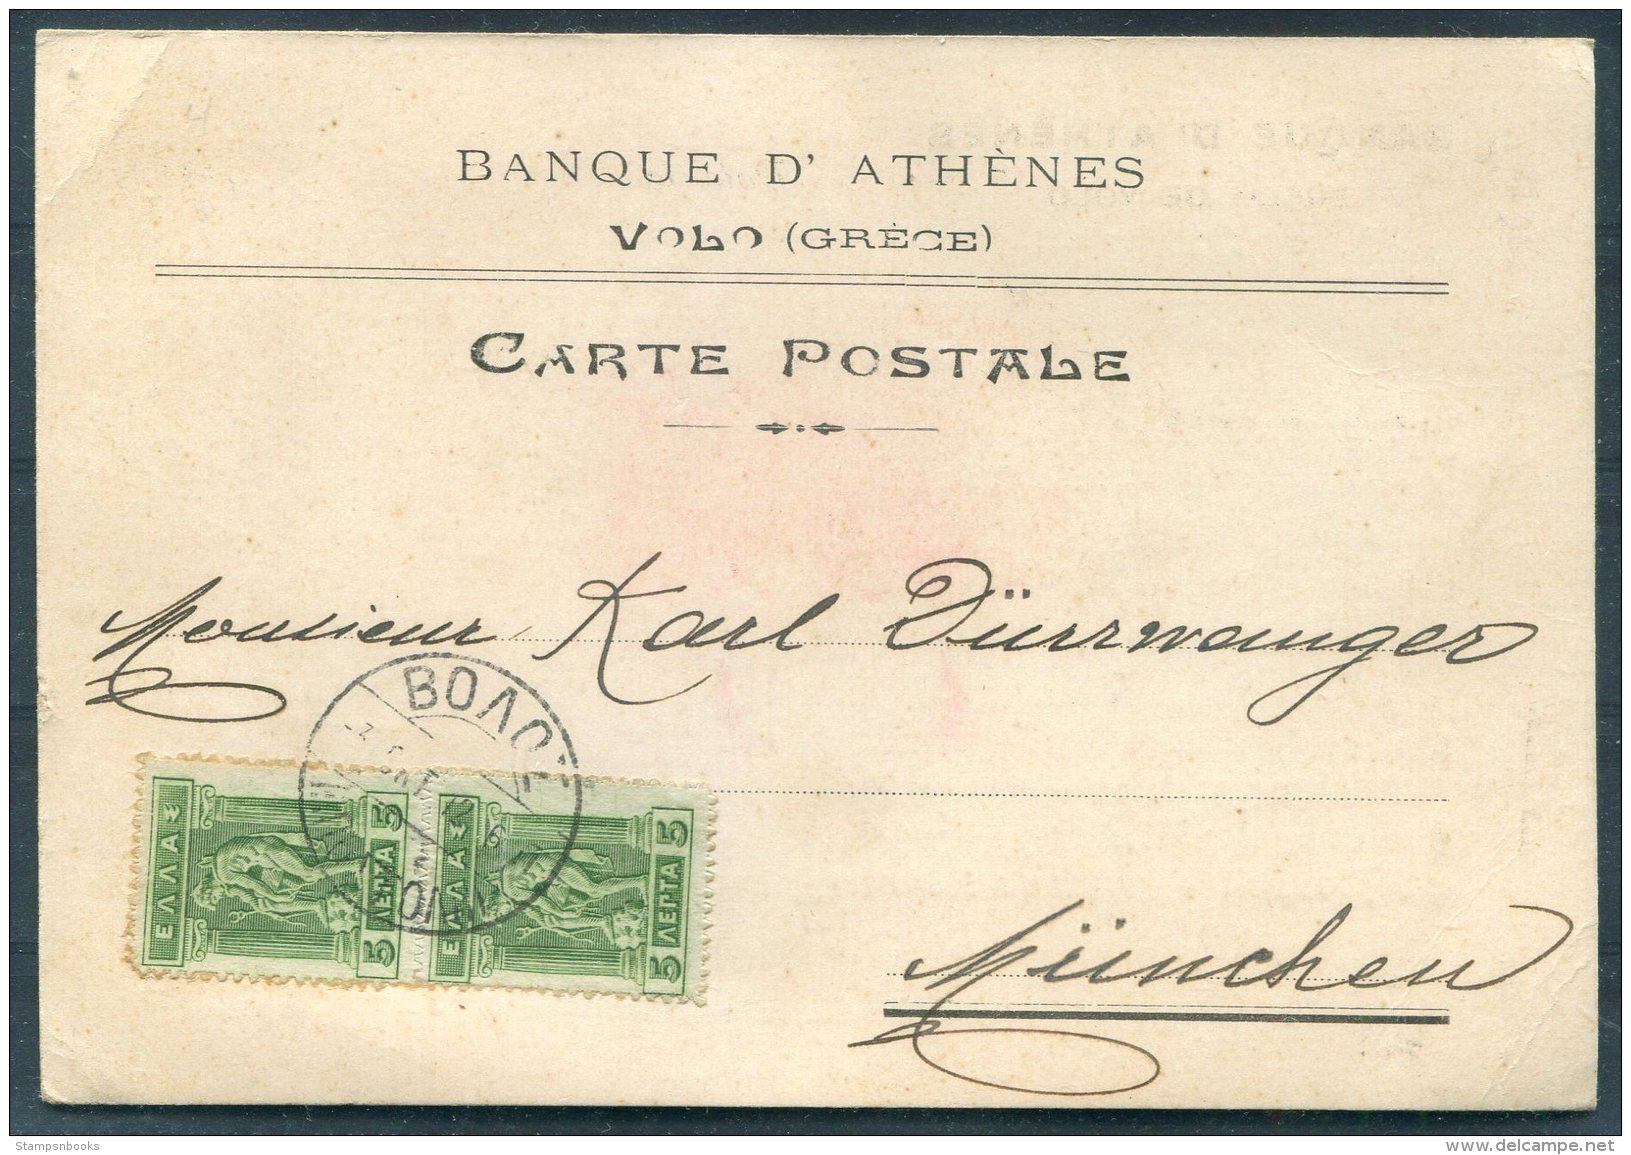 1912 Greece Banque D'Athenes 'Volos'  Bank Postcard -  Munchen, Germany - Covers & Documents